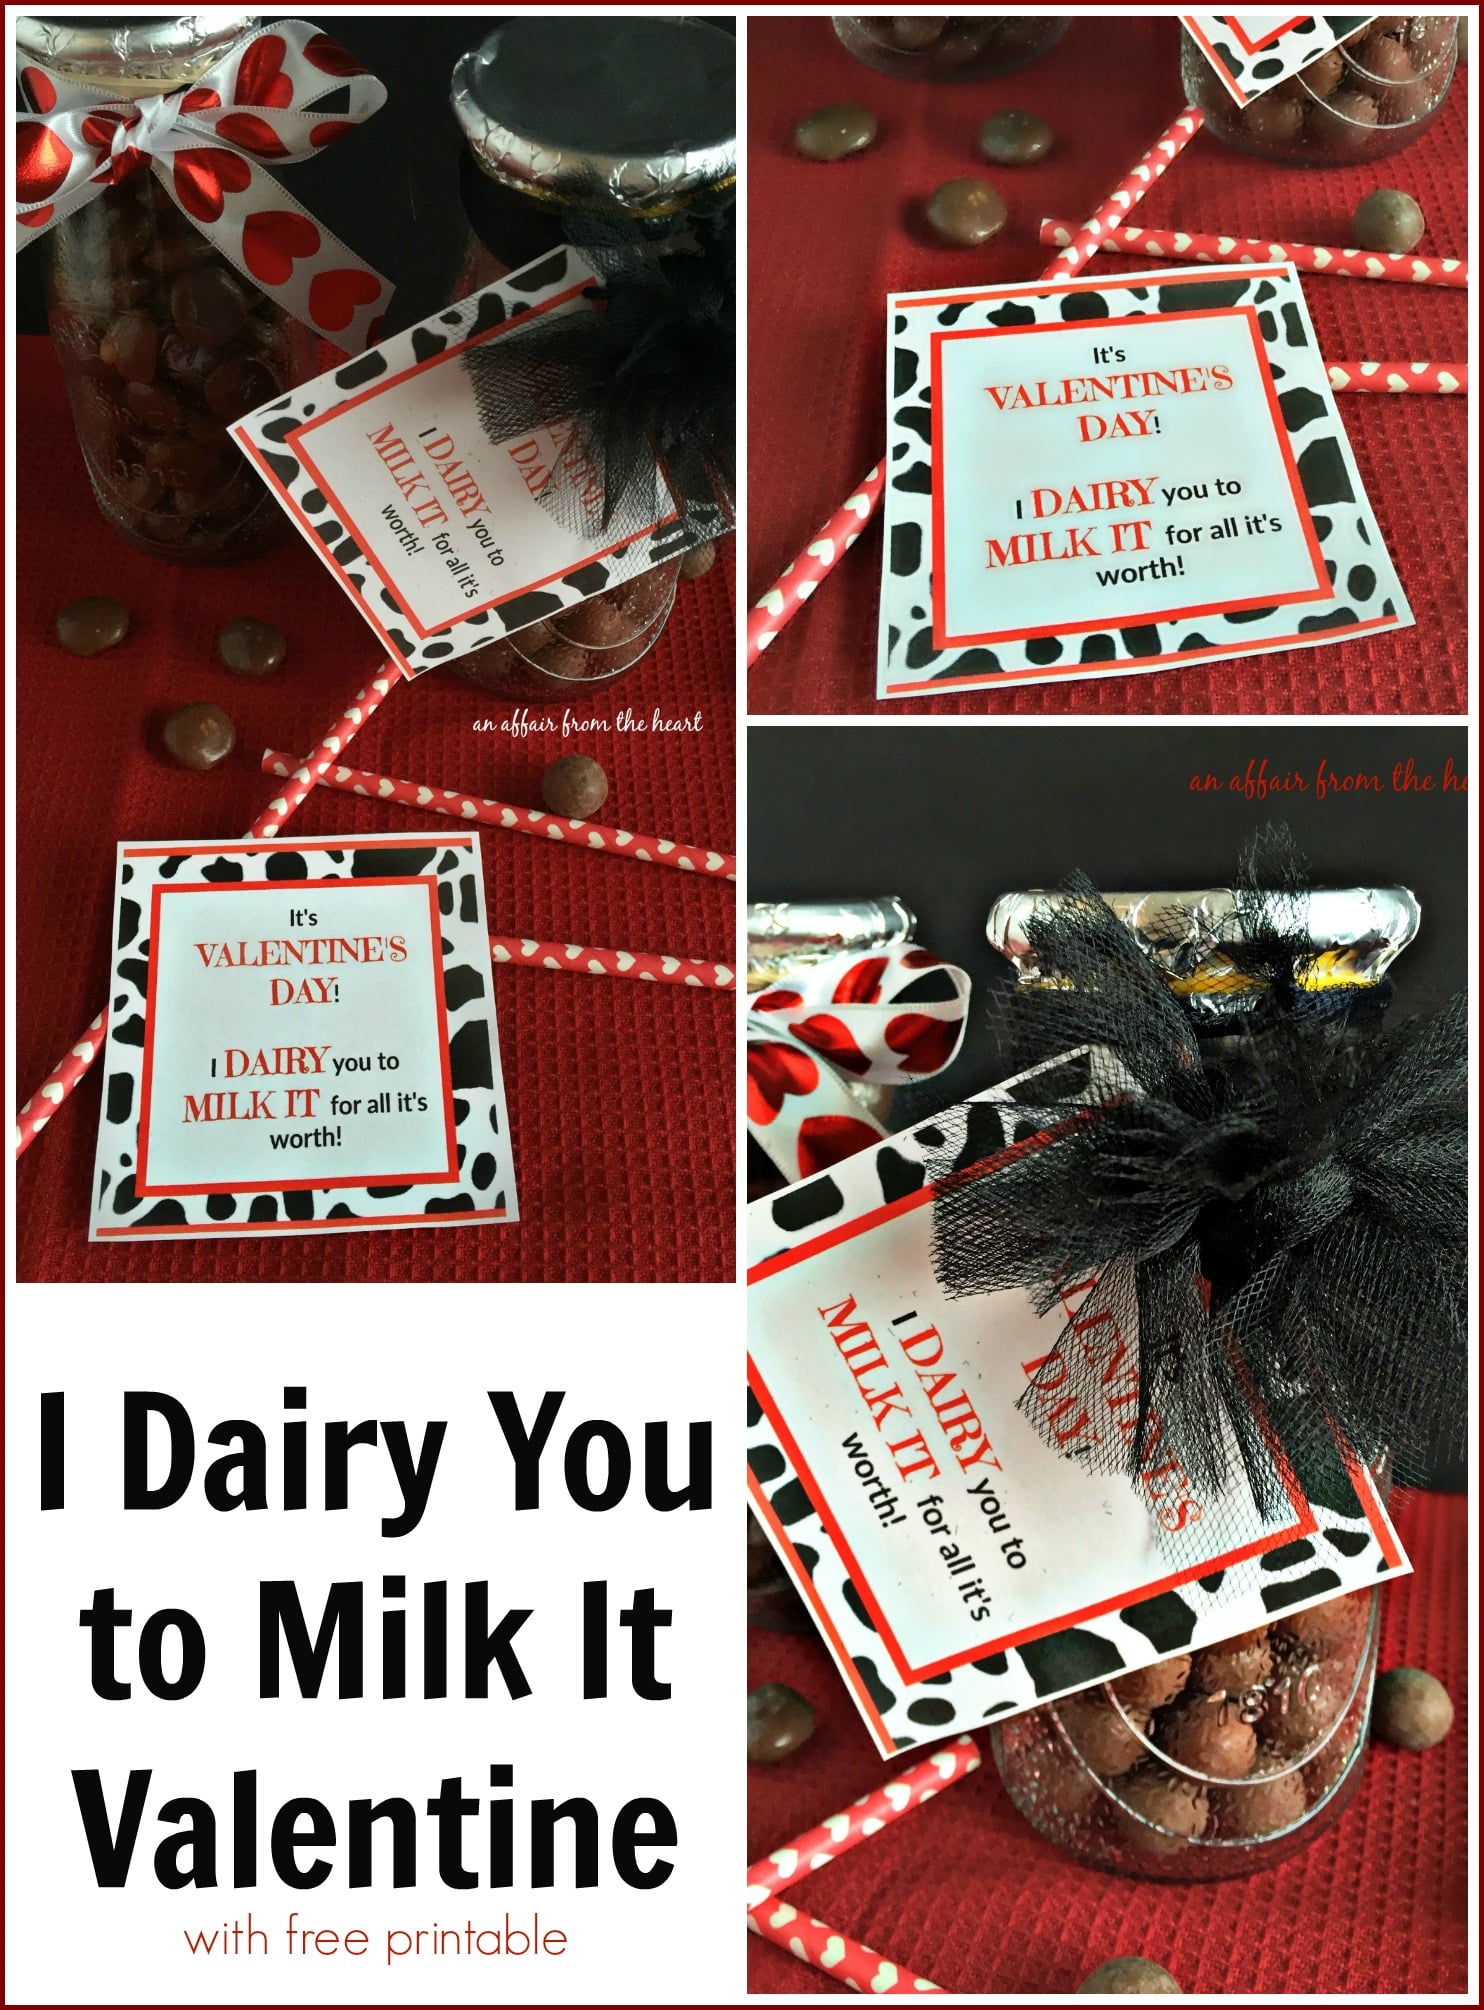 I Dairy You to Milk It – Valentine Idea with Free Printable